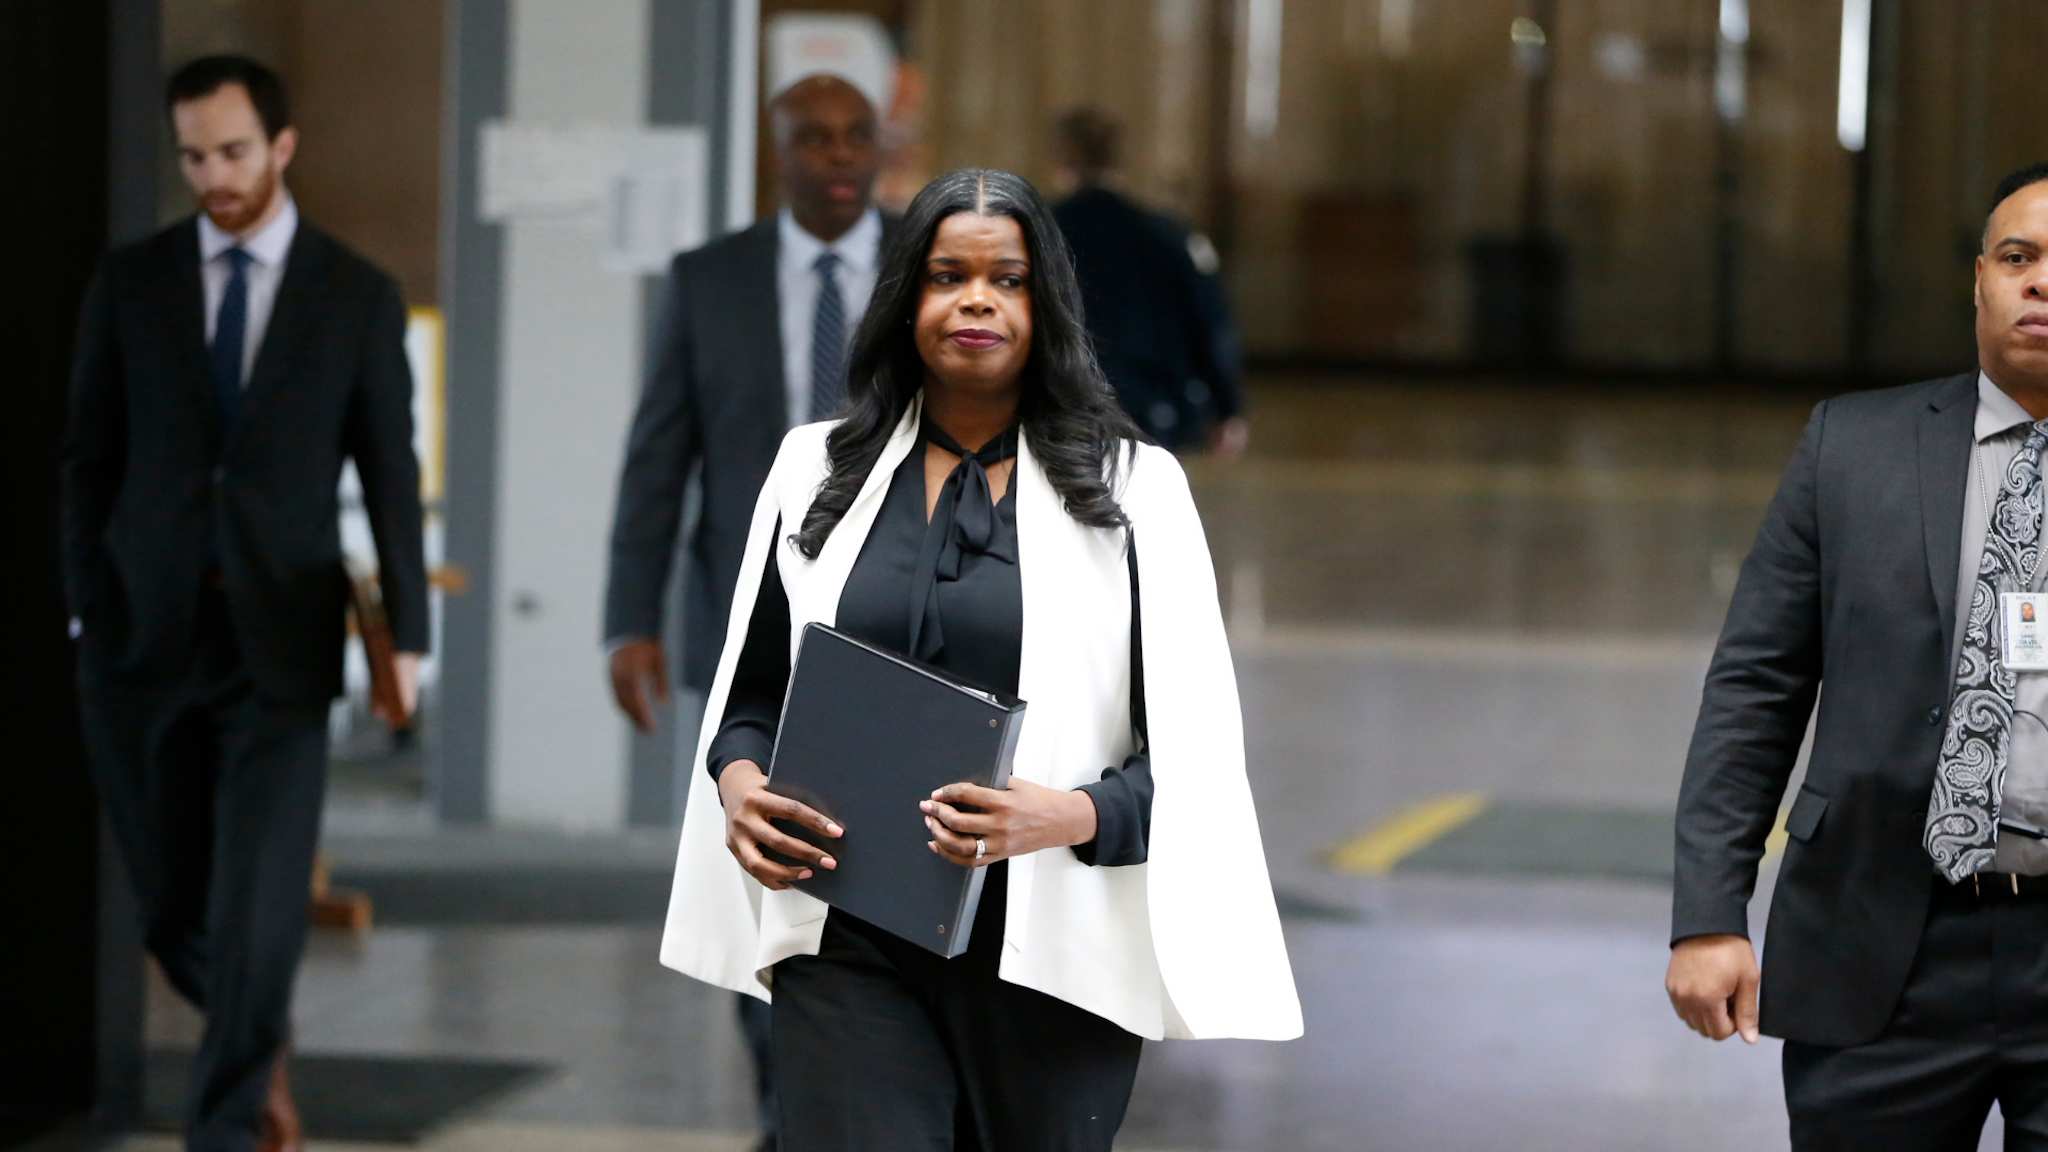 Cook County State's attorney Kim Foxx arrives to speak with reporters and details the charges against R. Kelly's first court appearance at the Leighton Criminal Courthouse on February 23, 2019 in Chicago, Illinois.